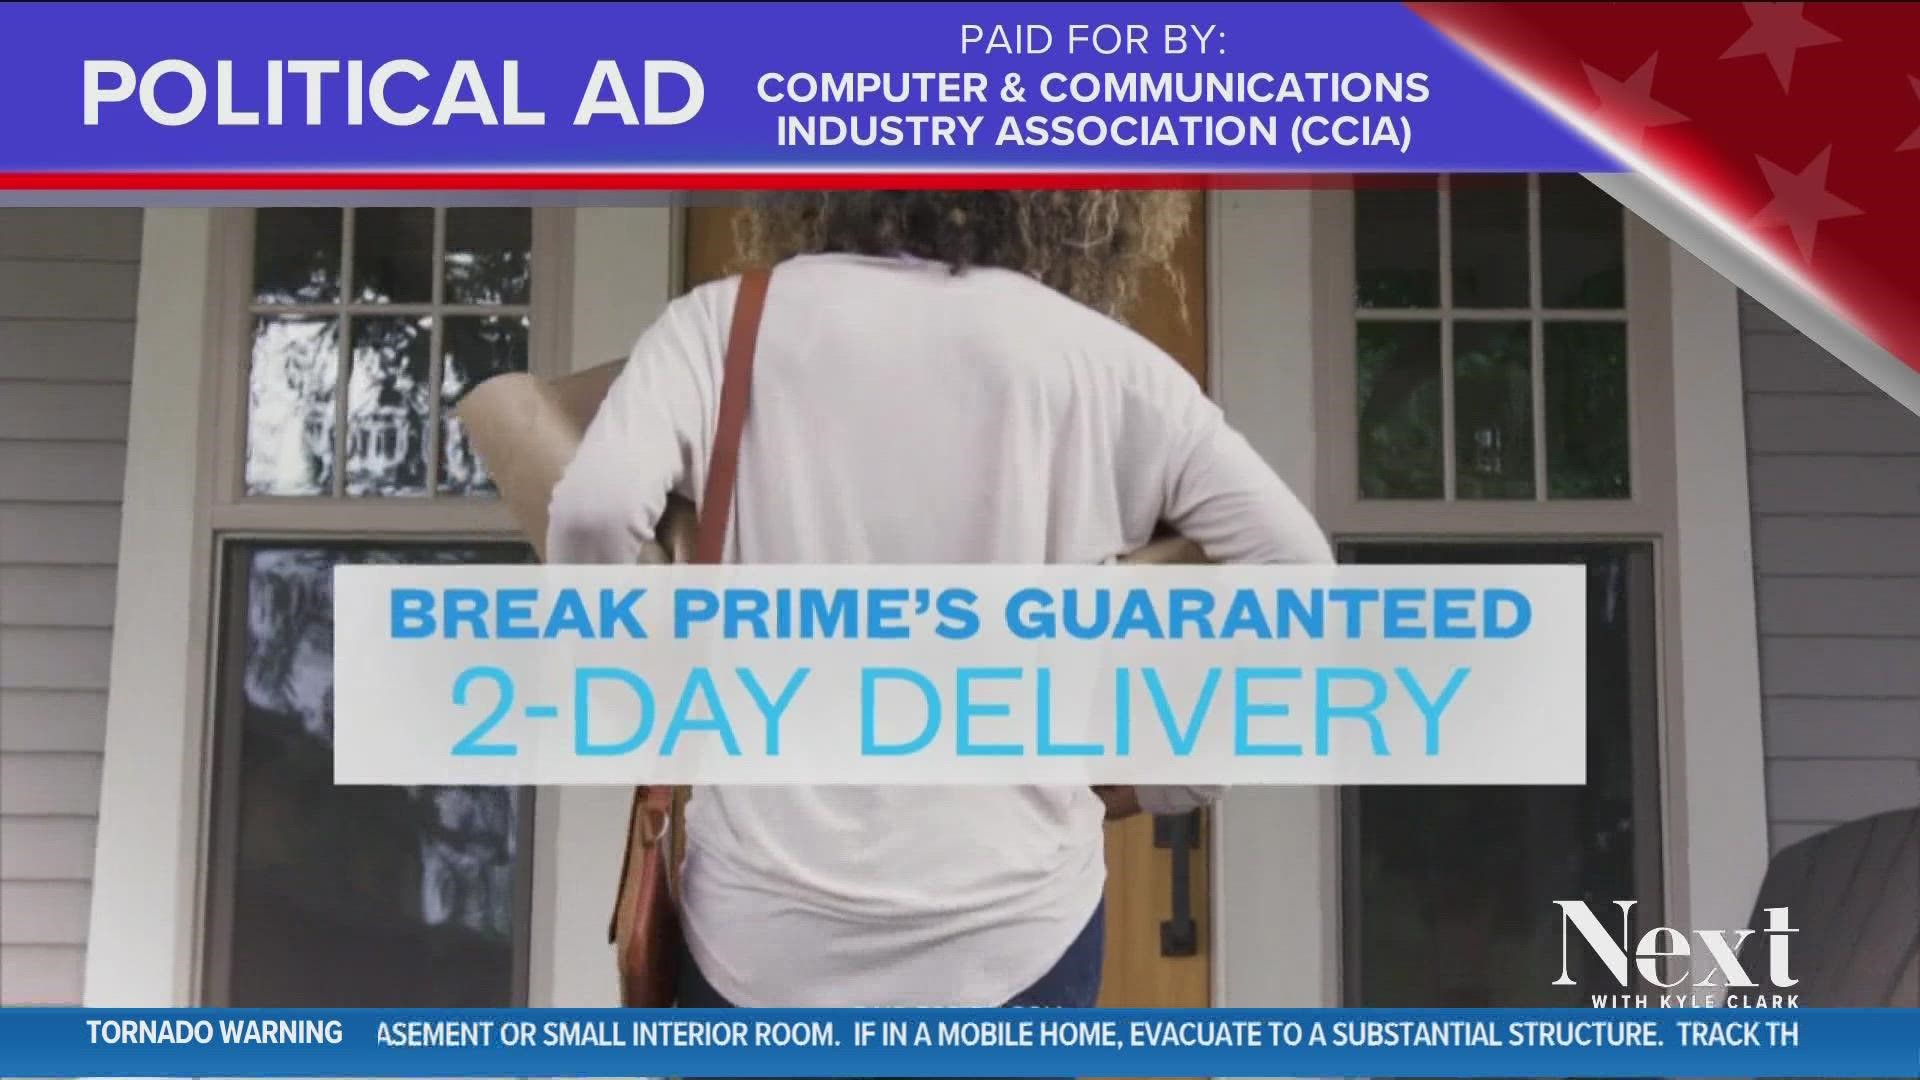 The ad is paid for by CCIA, or the Computer and Communications Industry Association, which  lists Amazon, Apple and Google as members.